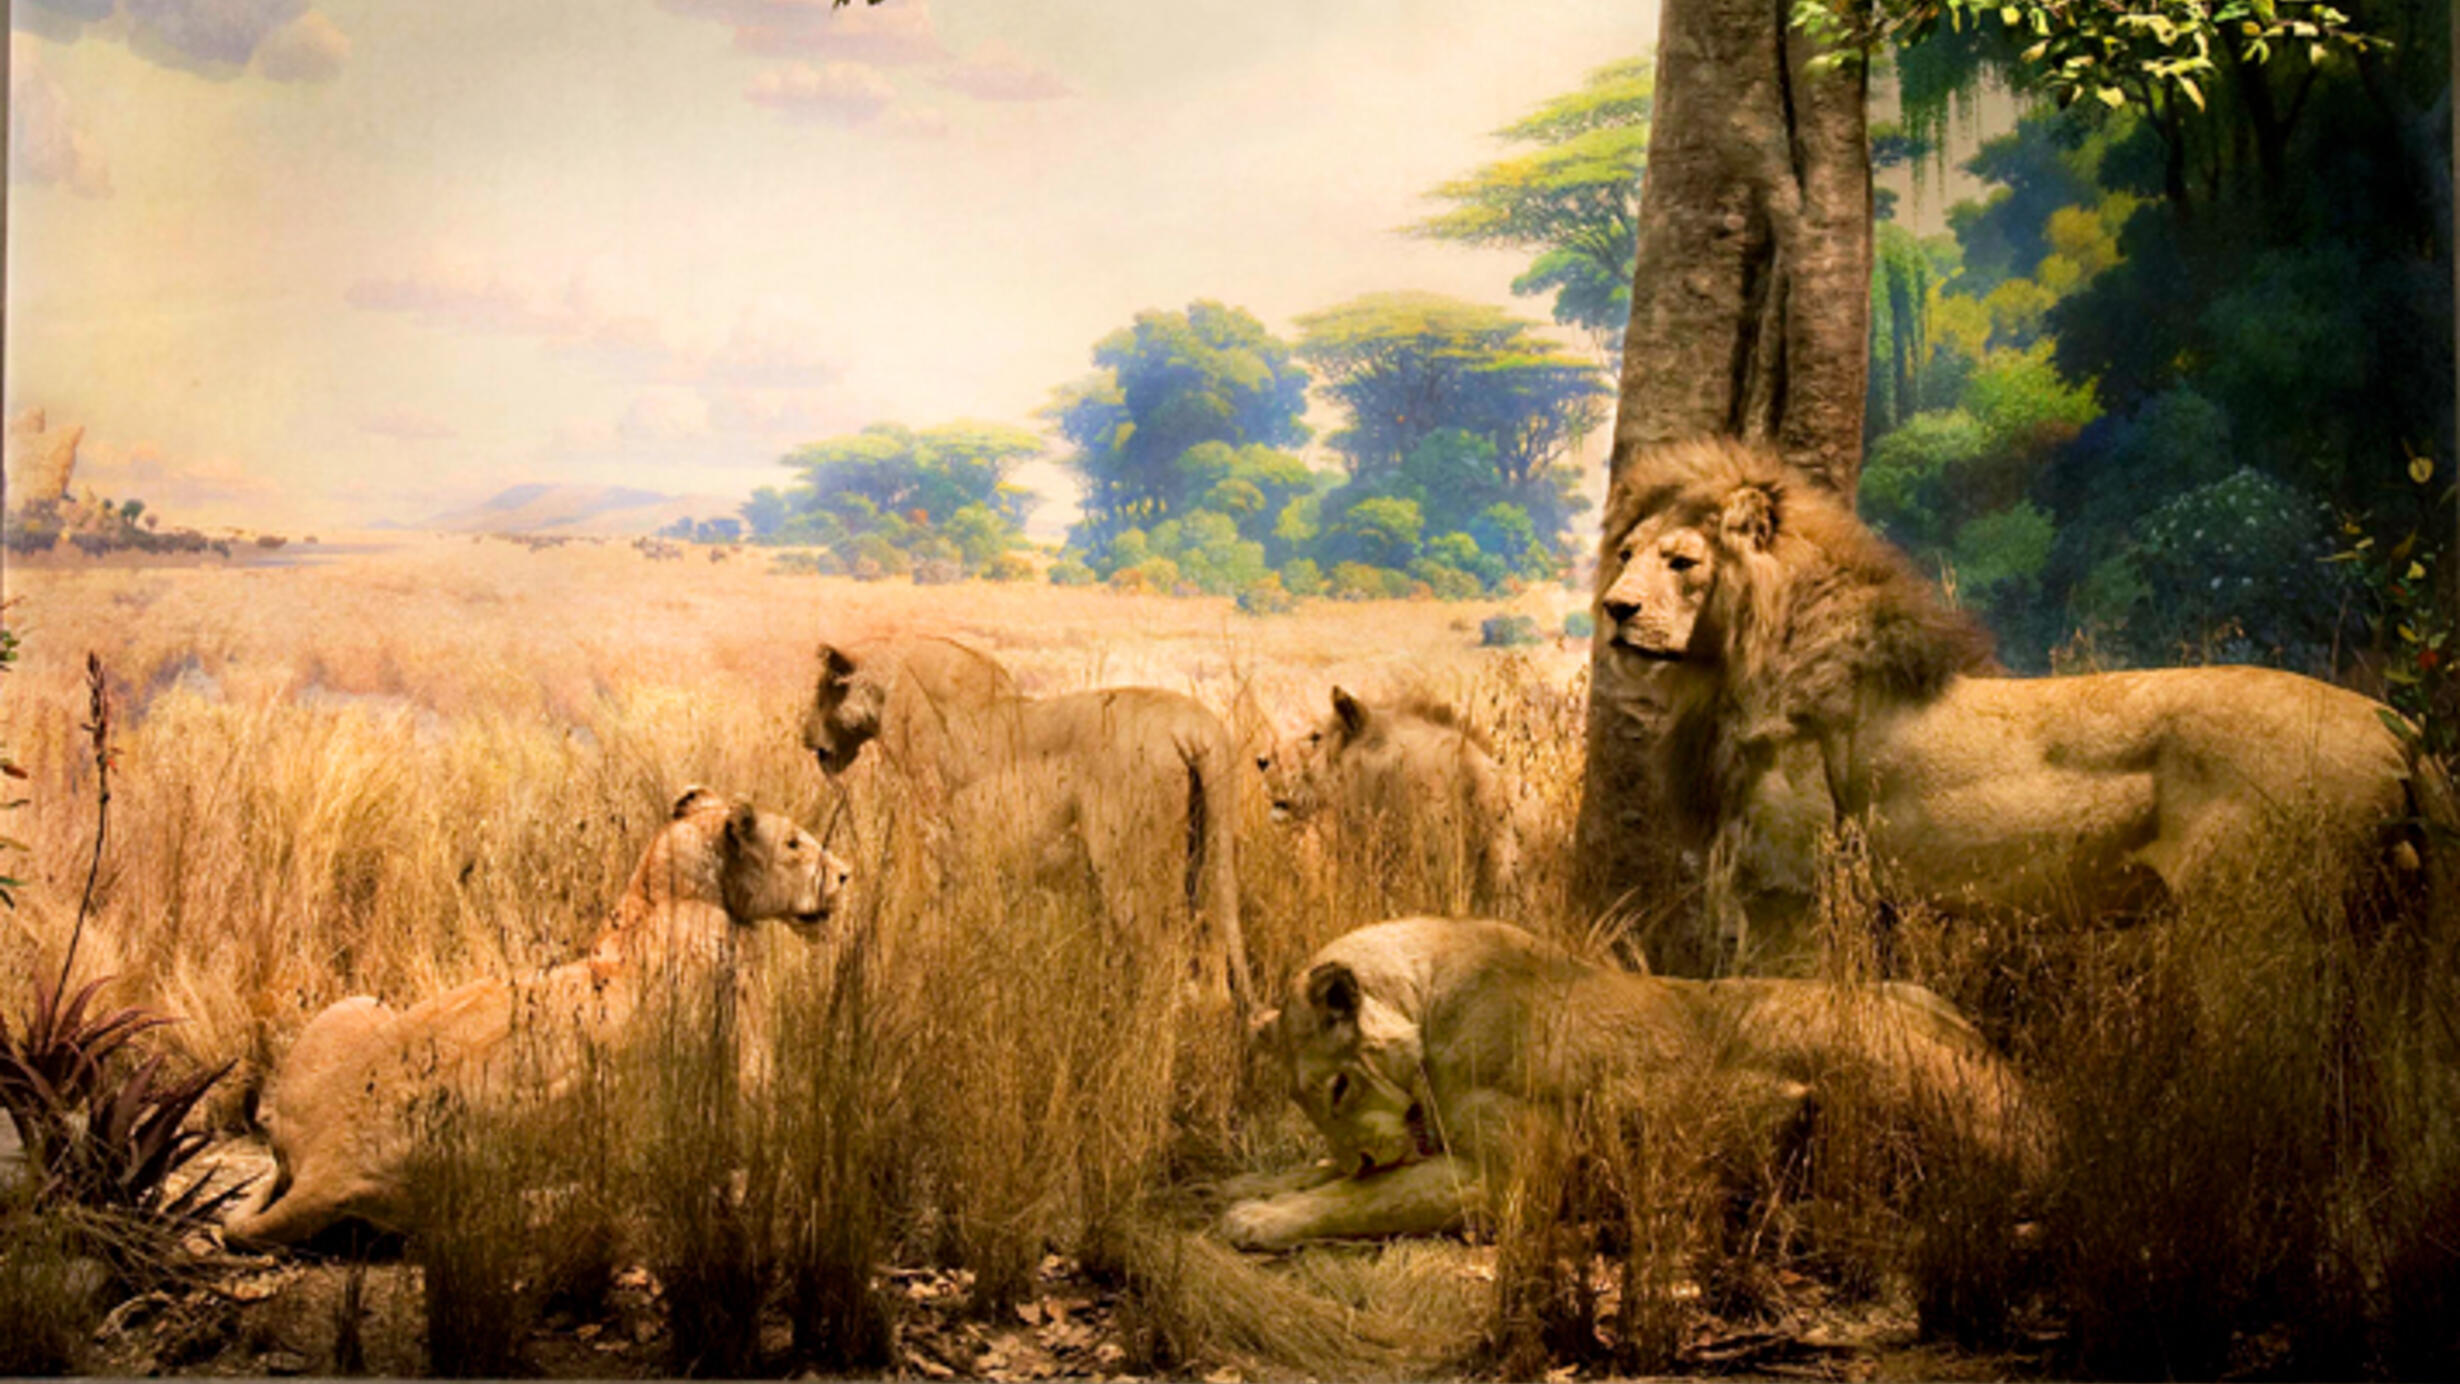 The diorama of African lions show a pride of one male standing beside a tree, with four females nearby in tall dry grass.